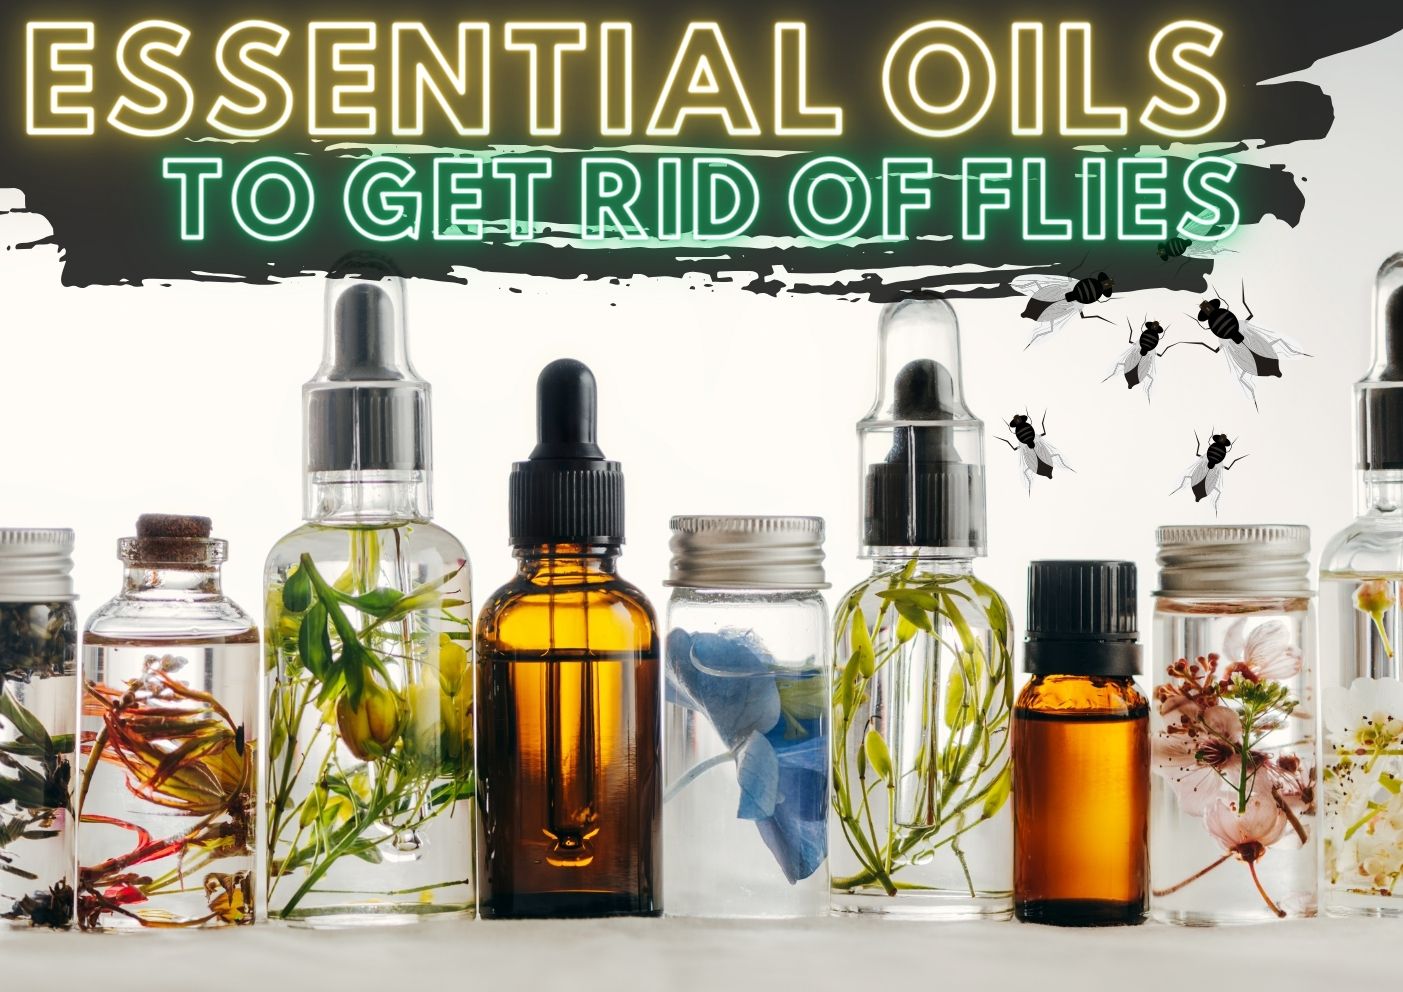 Essential oils to get rid of flies